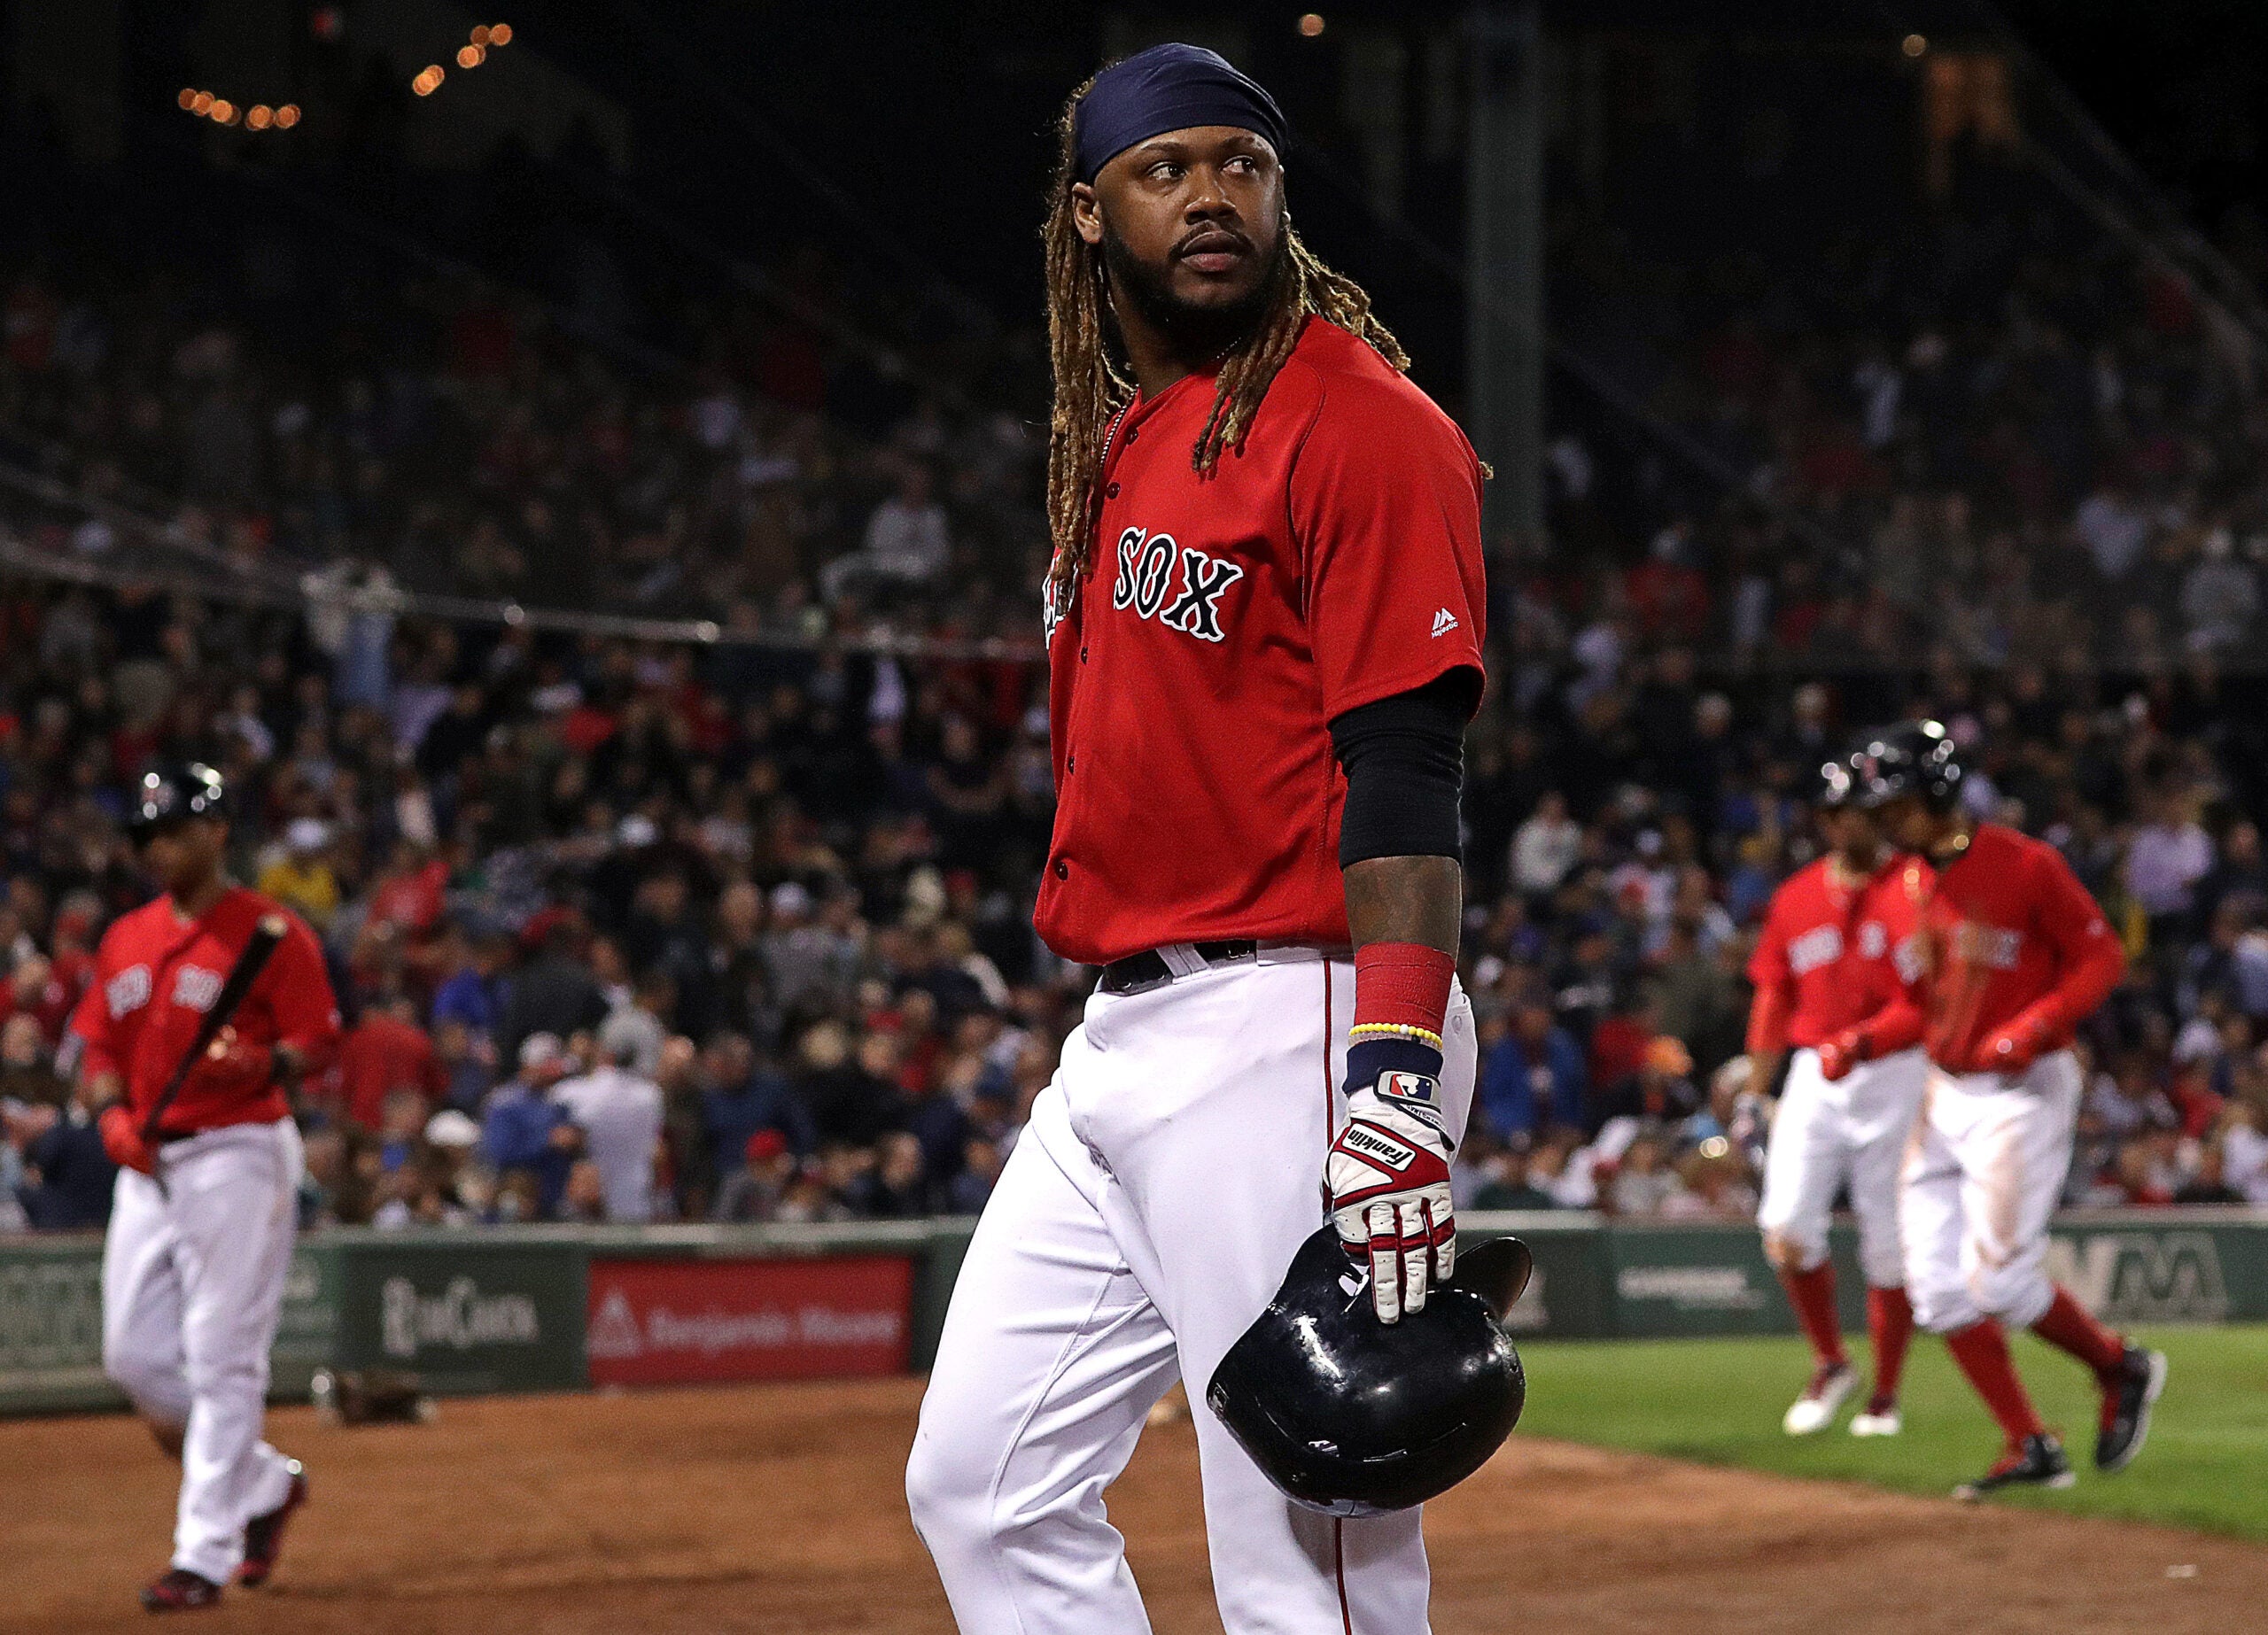 Report: Hanley Ramirez Agrees To Five-Year Deal With Red Sox - CBS Boston